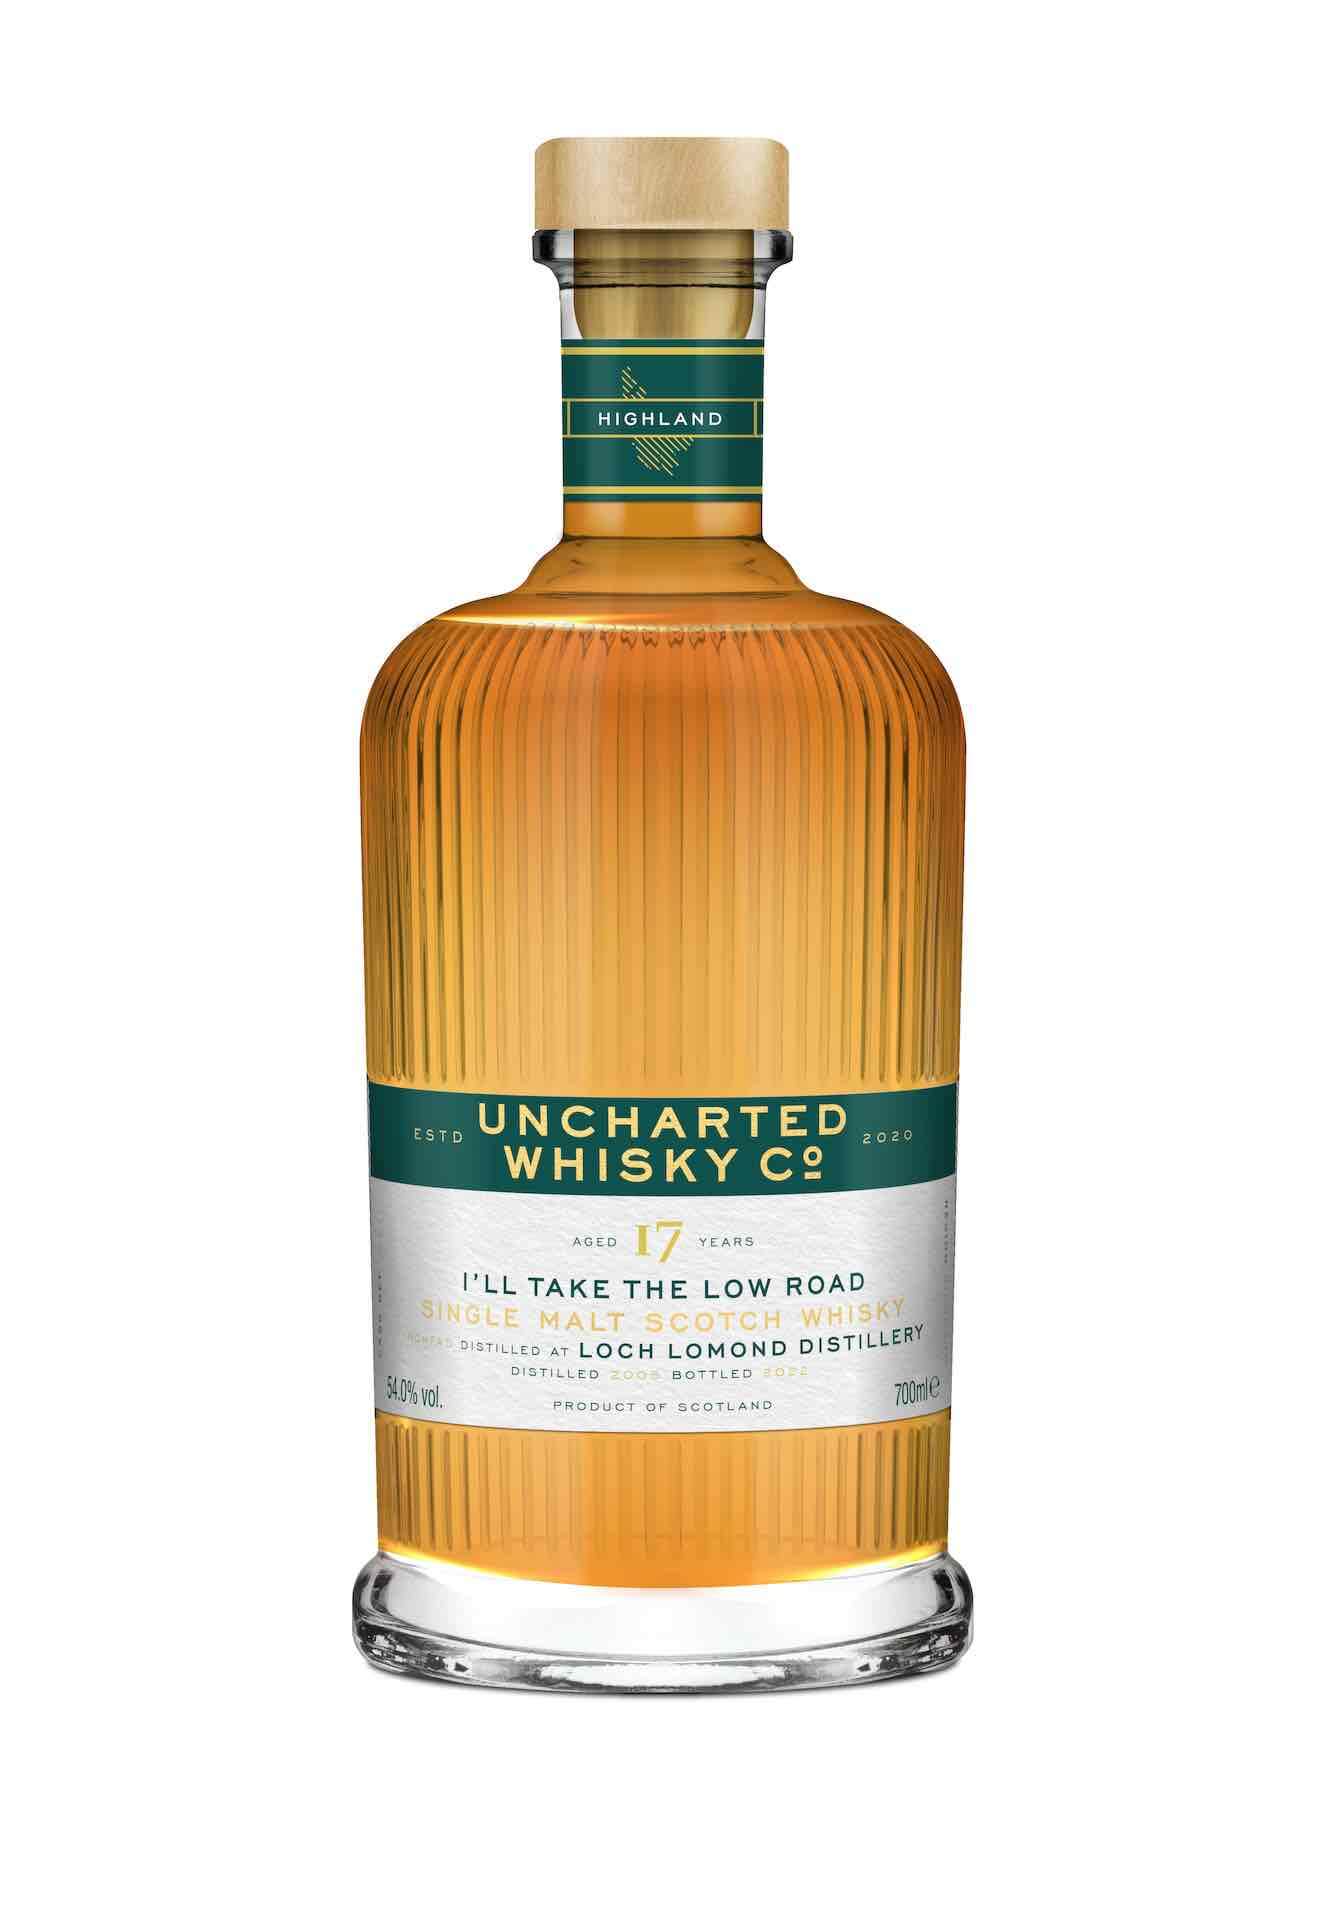 Uncharted Whisky Co, I'll Take The Low Road, Inchfad 17 Year Old